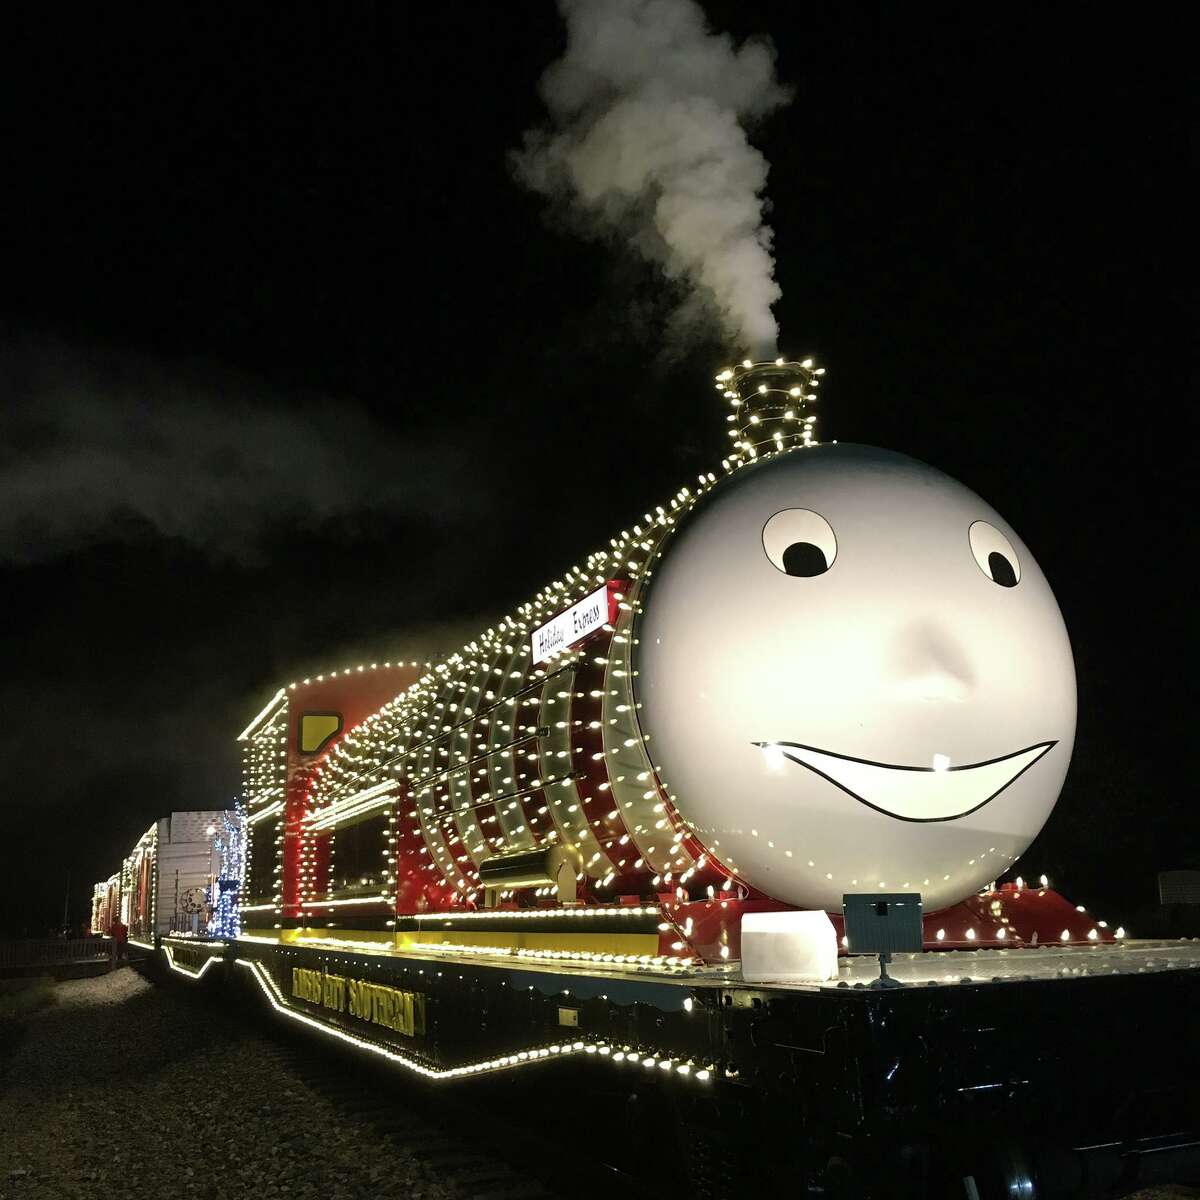 Pictured is the Kansas City Southern Holiday Express train, which did not run for the second straight holiday due to COVID-19. However, the fundraiser it does run with raised $280,000 to benefit The Salvation Army in 21 communities, including Laredo.